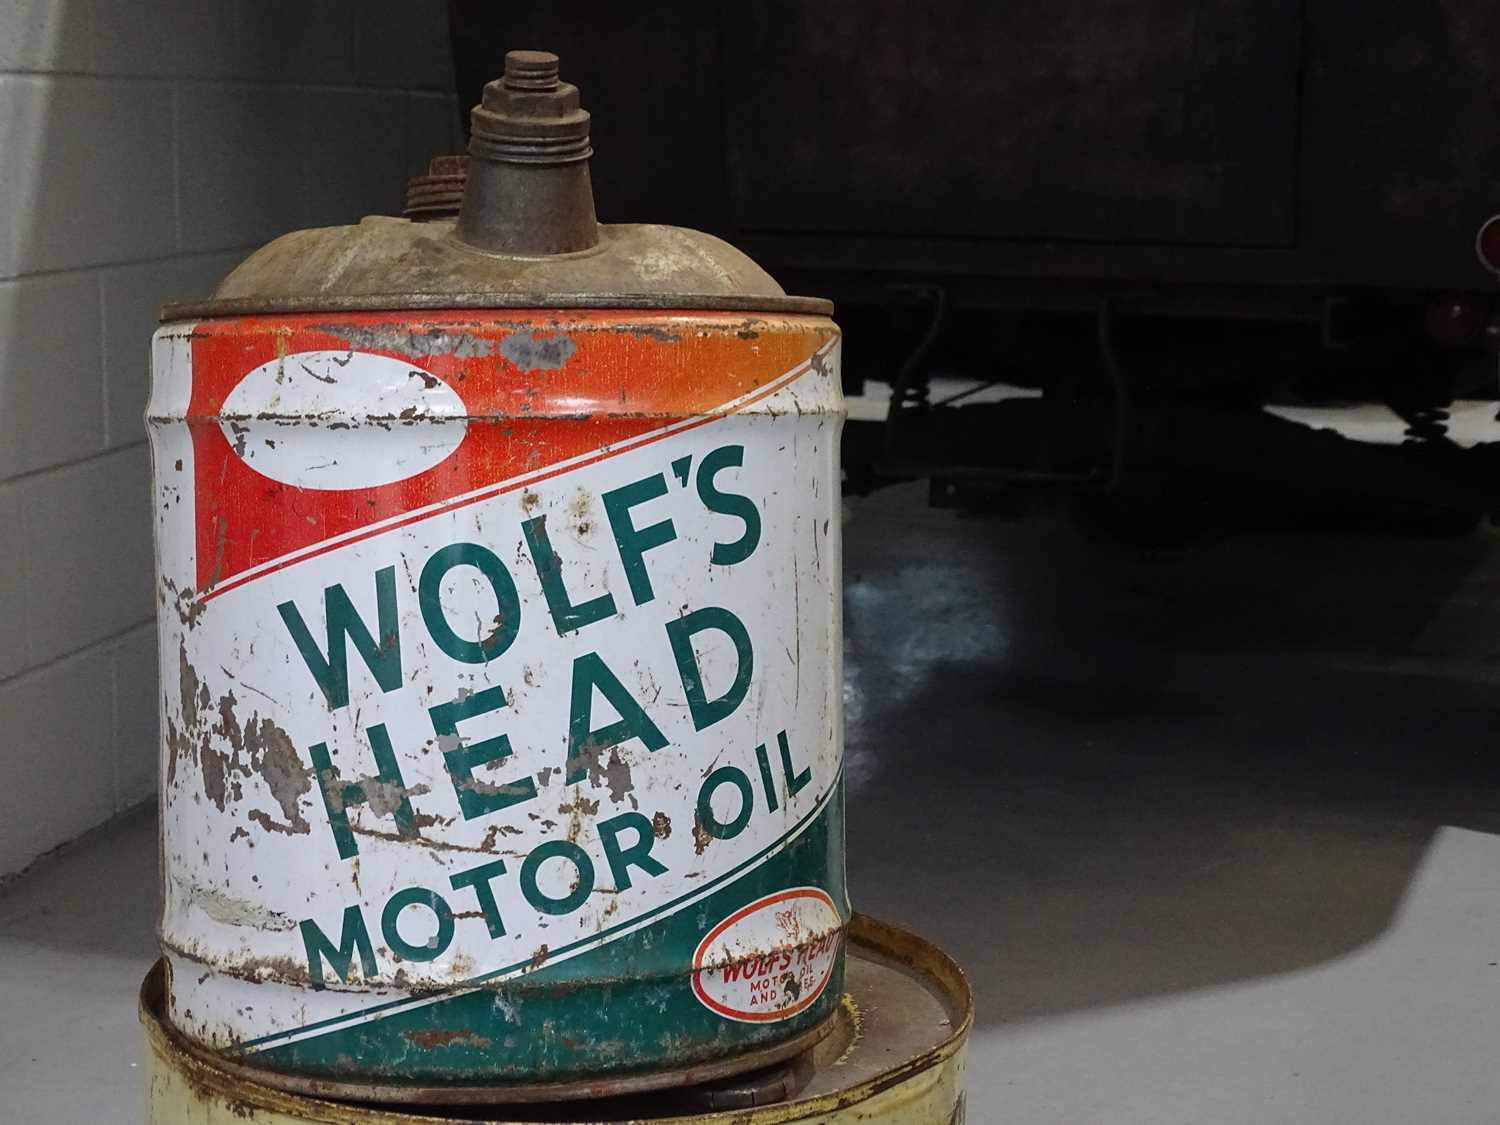 Lot 20 - Wolfs head oil container with cap